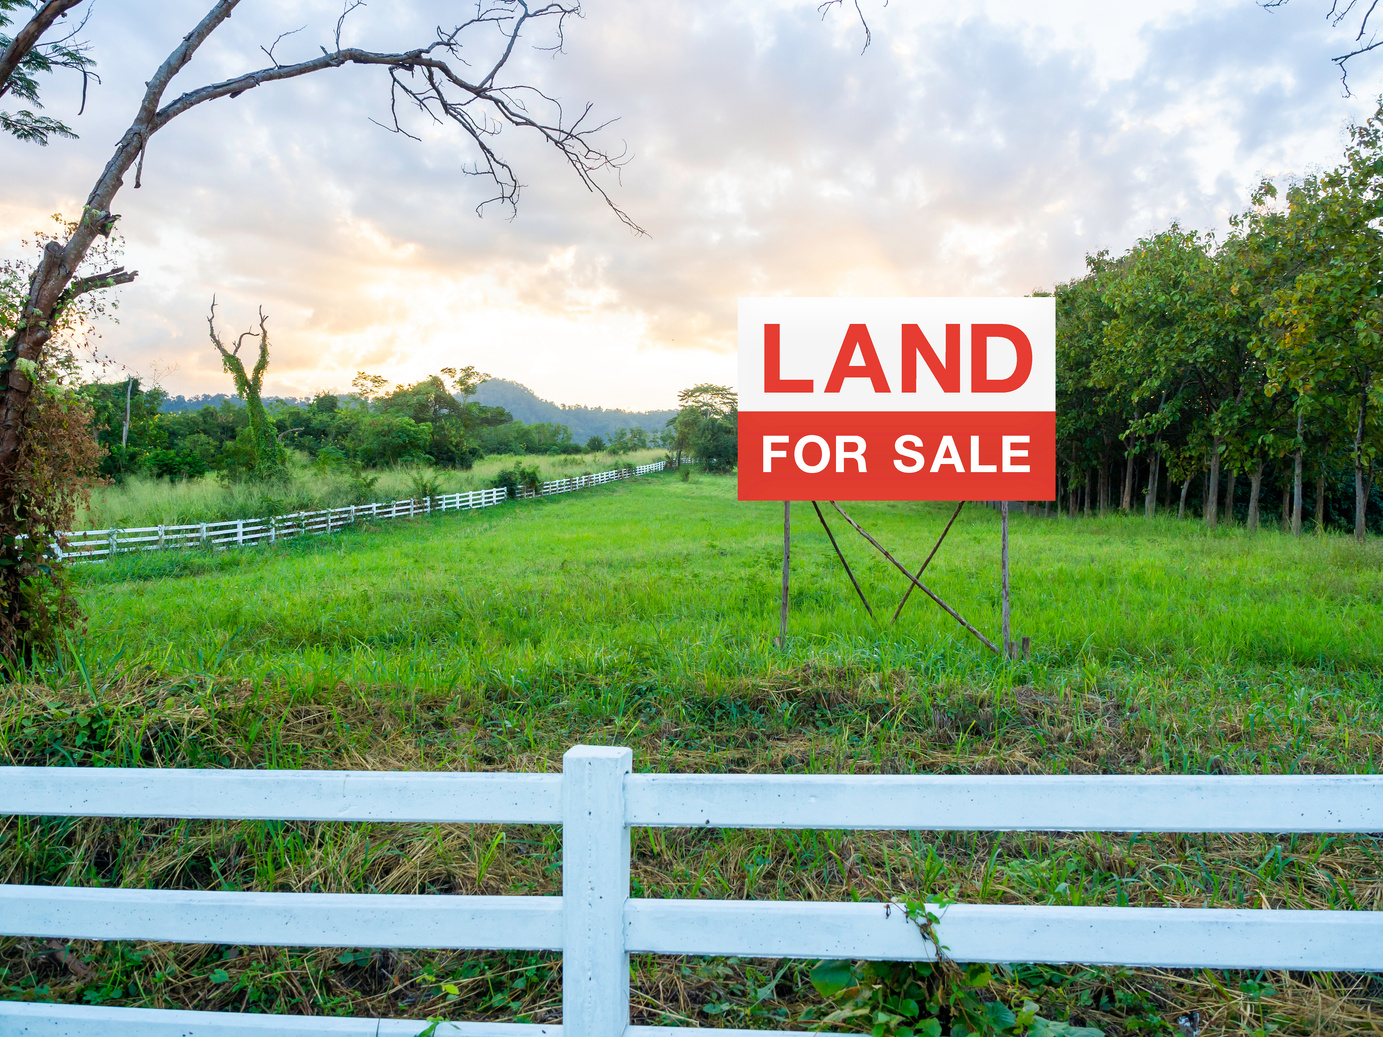 Land for sale sign on empty land.